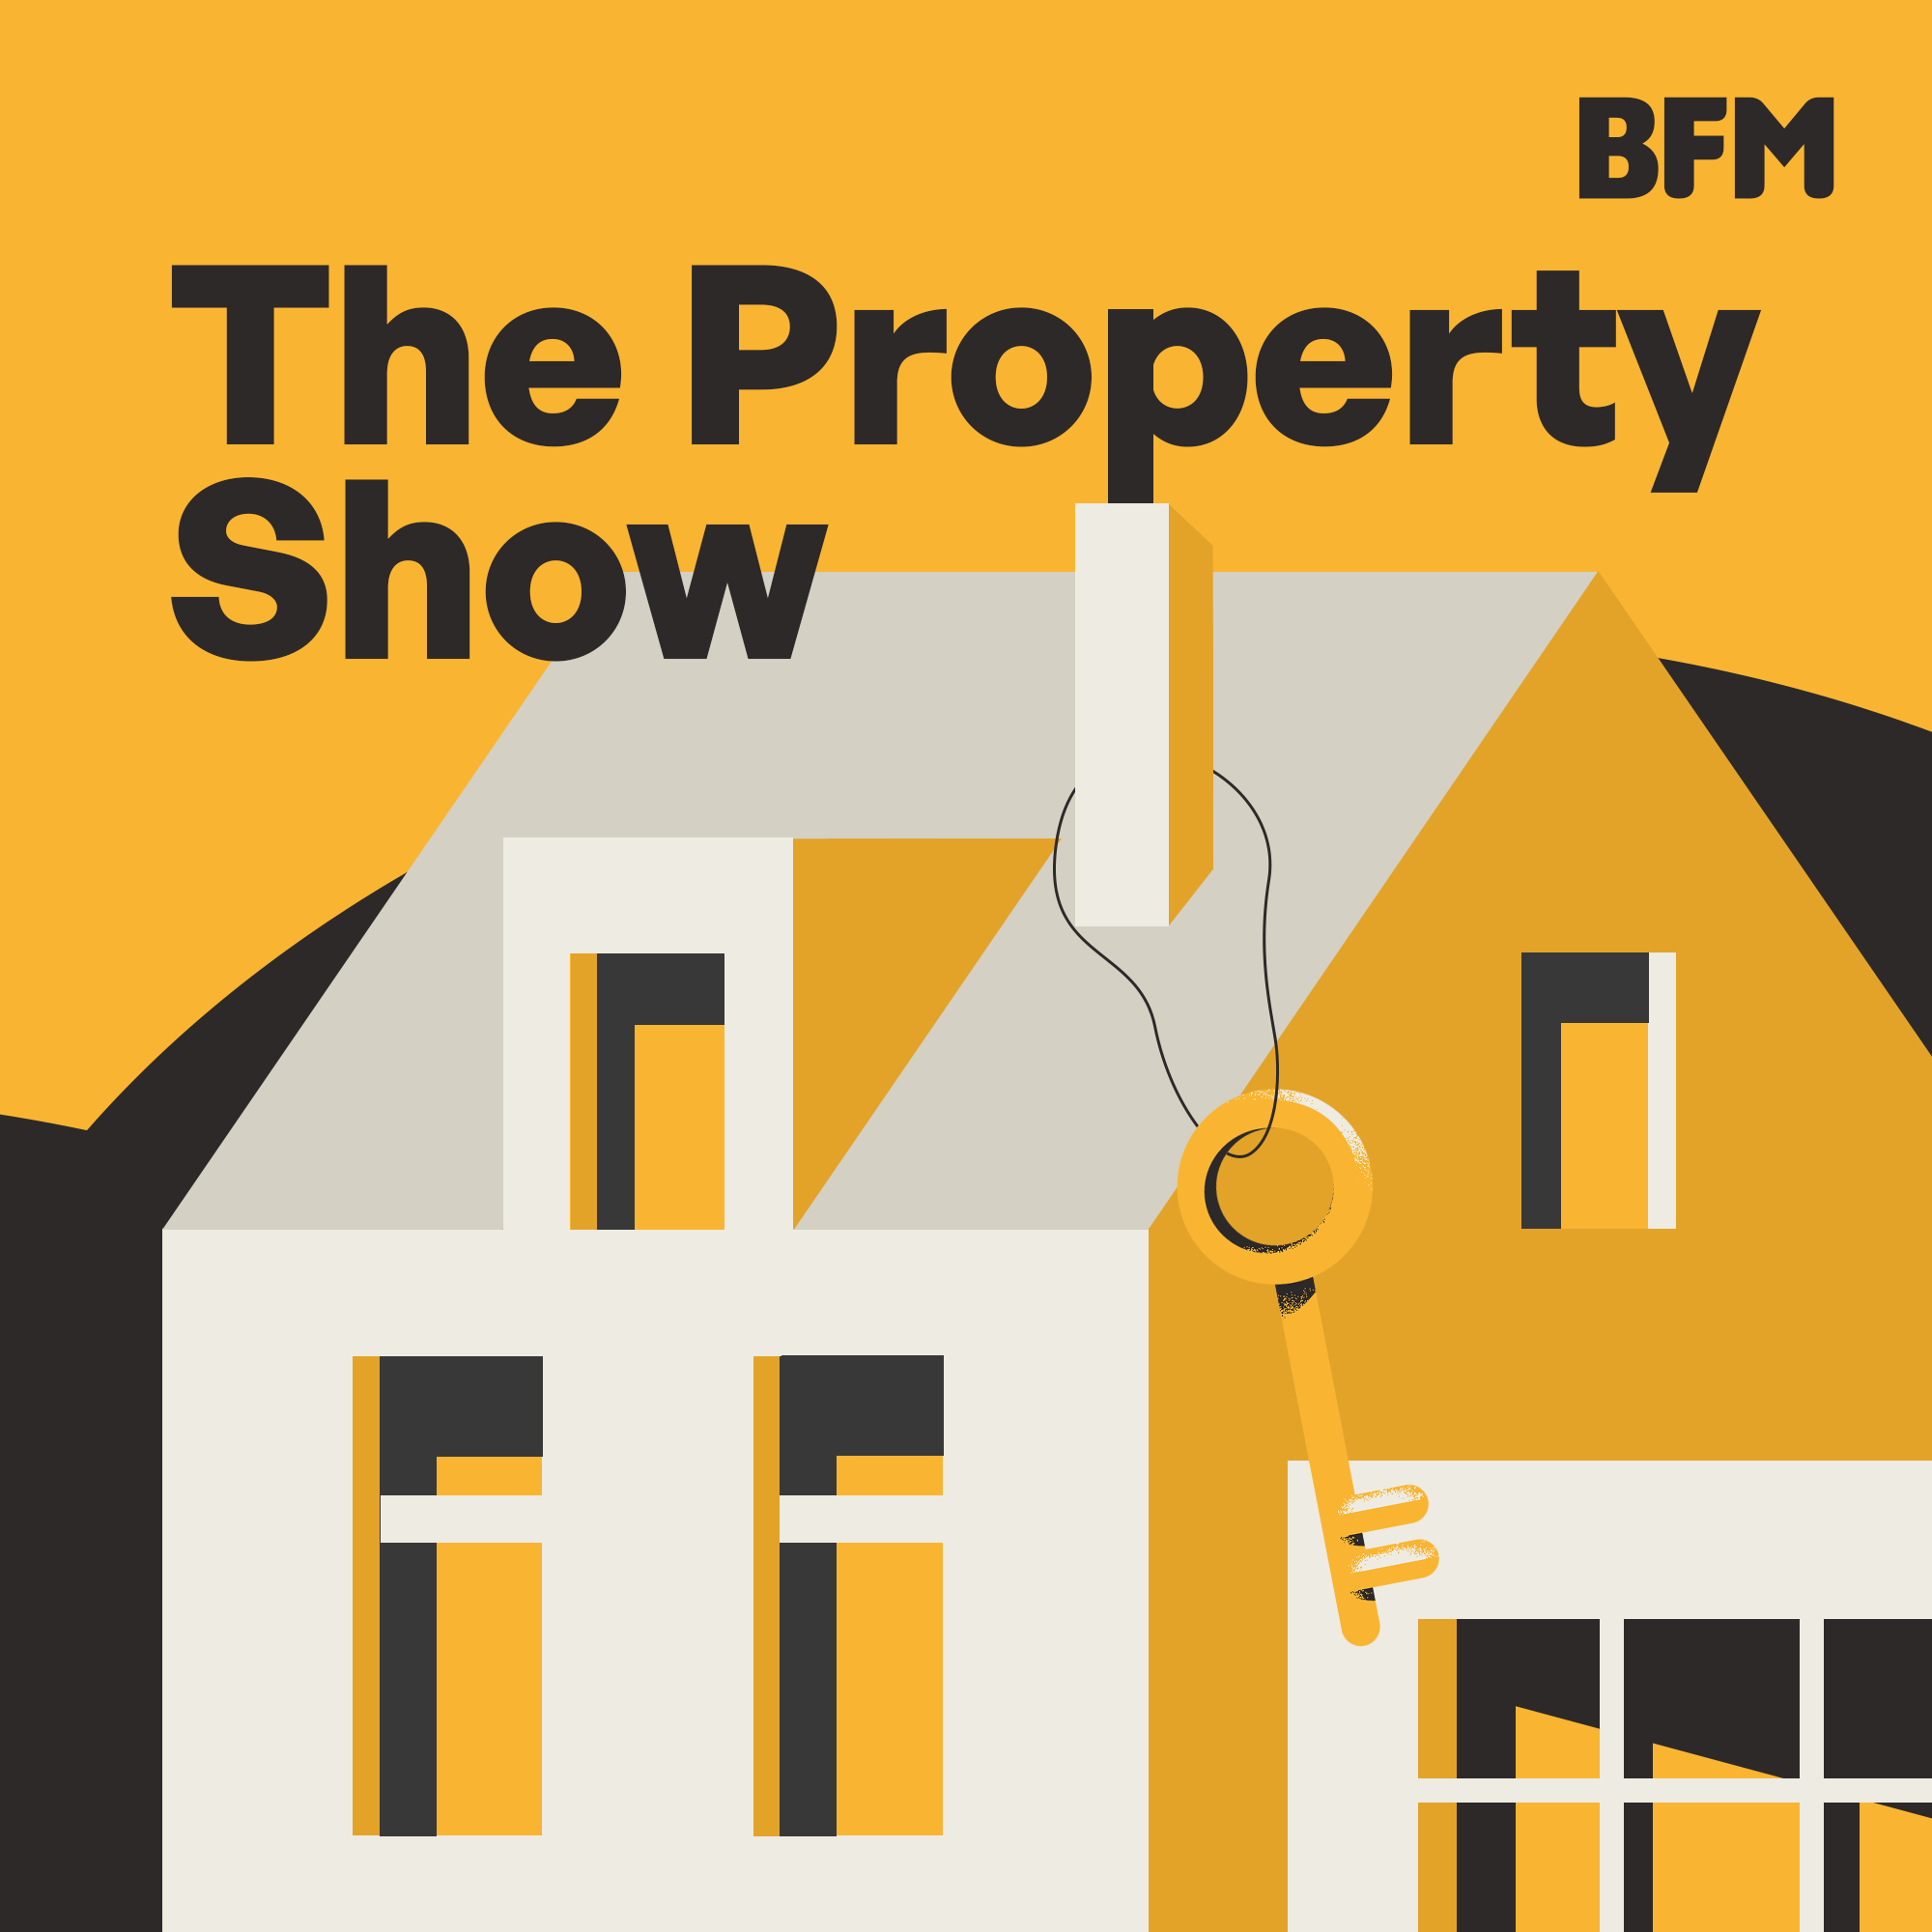 Knight Frank's Wealth Report's Insights Into The Property Market